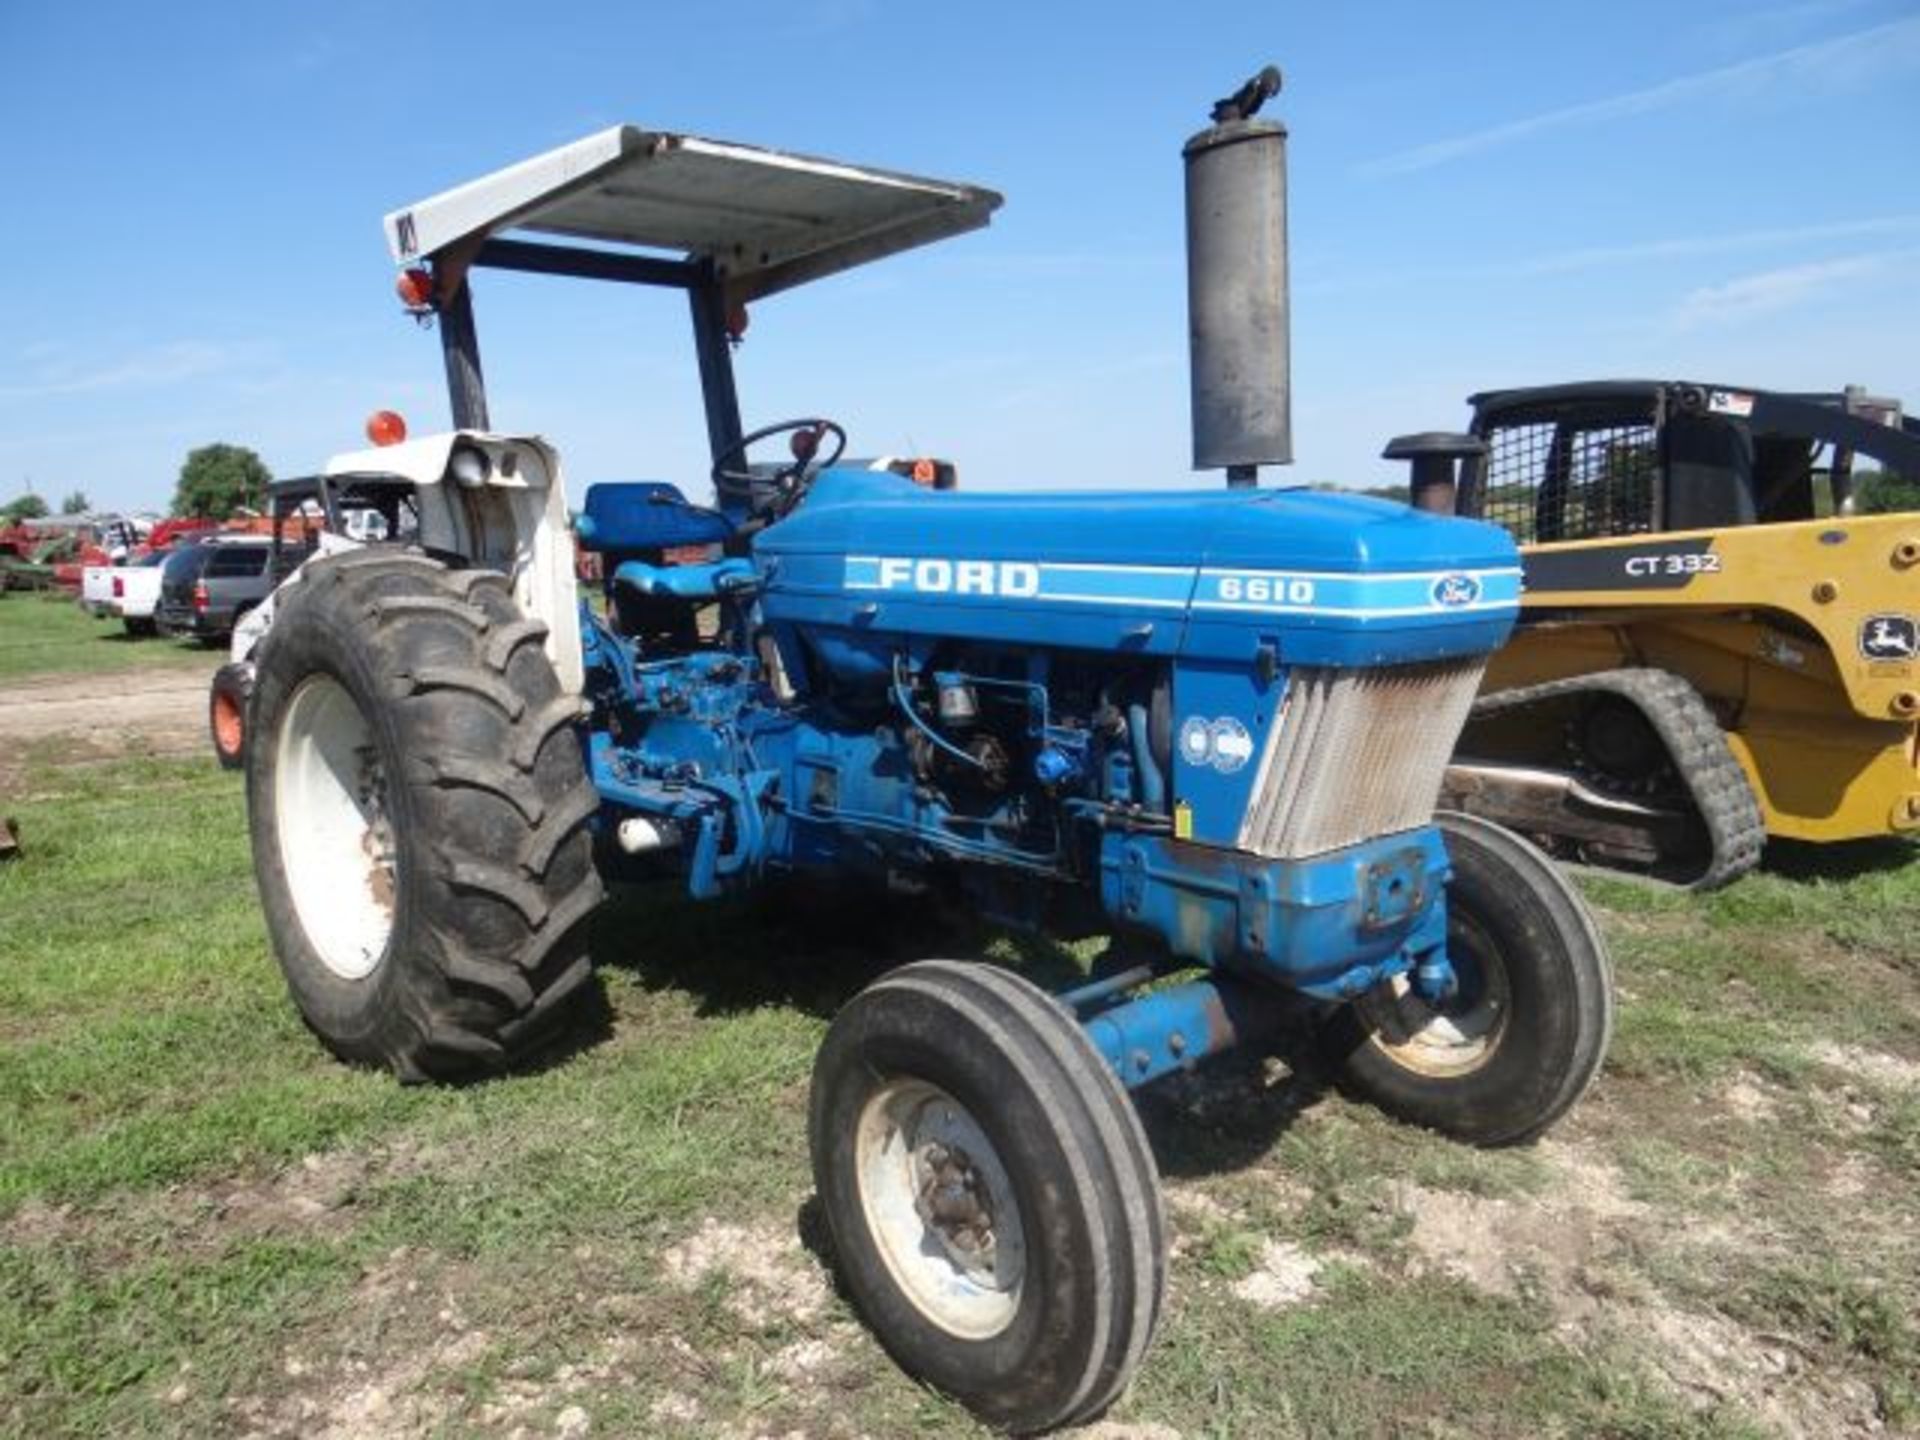 Ford 6610 Tractor Shows 5200 hrs, 2wd, OS w/ROPS and Canopy, 3pt, PTO, 2 SCVs, 18.4x30 Rear Tires, - Image 2 of 4